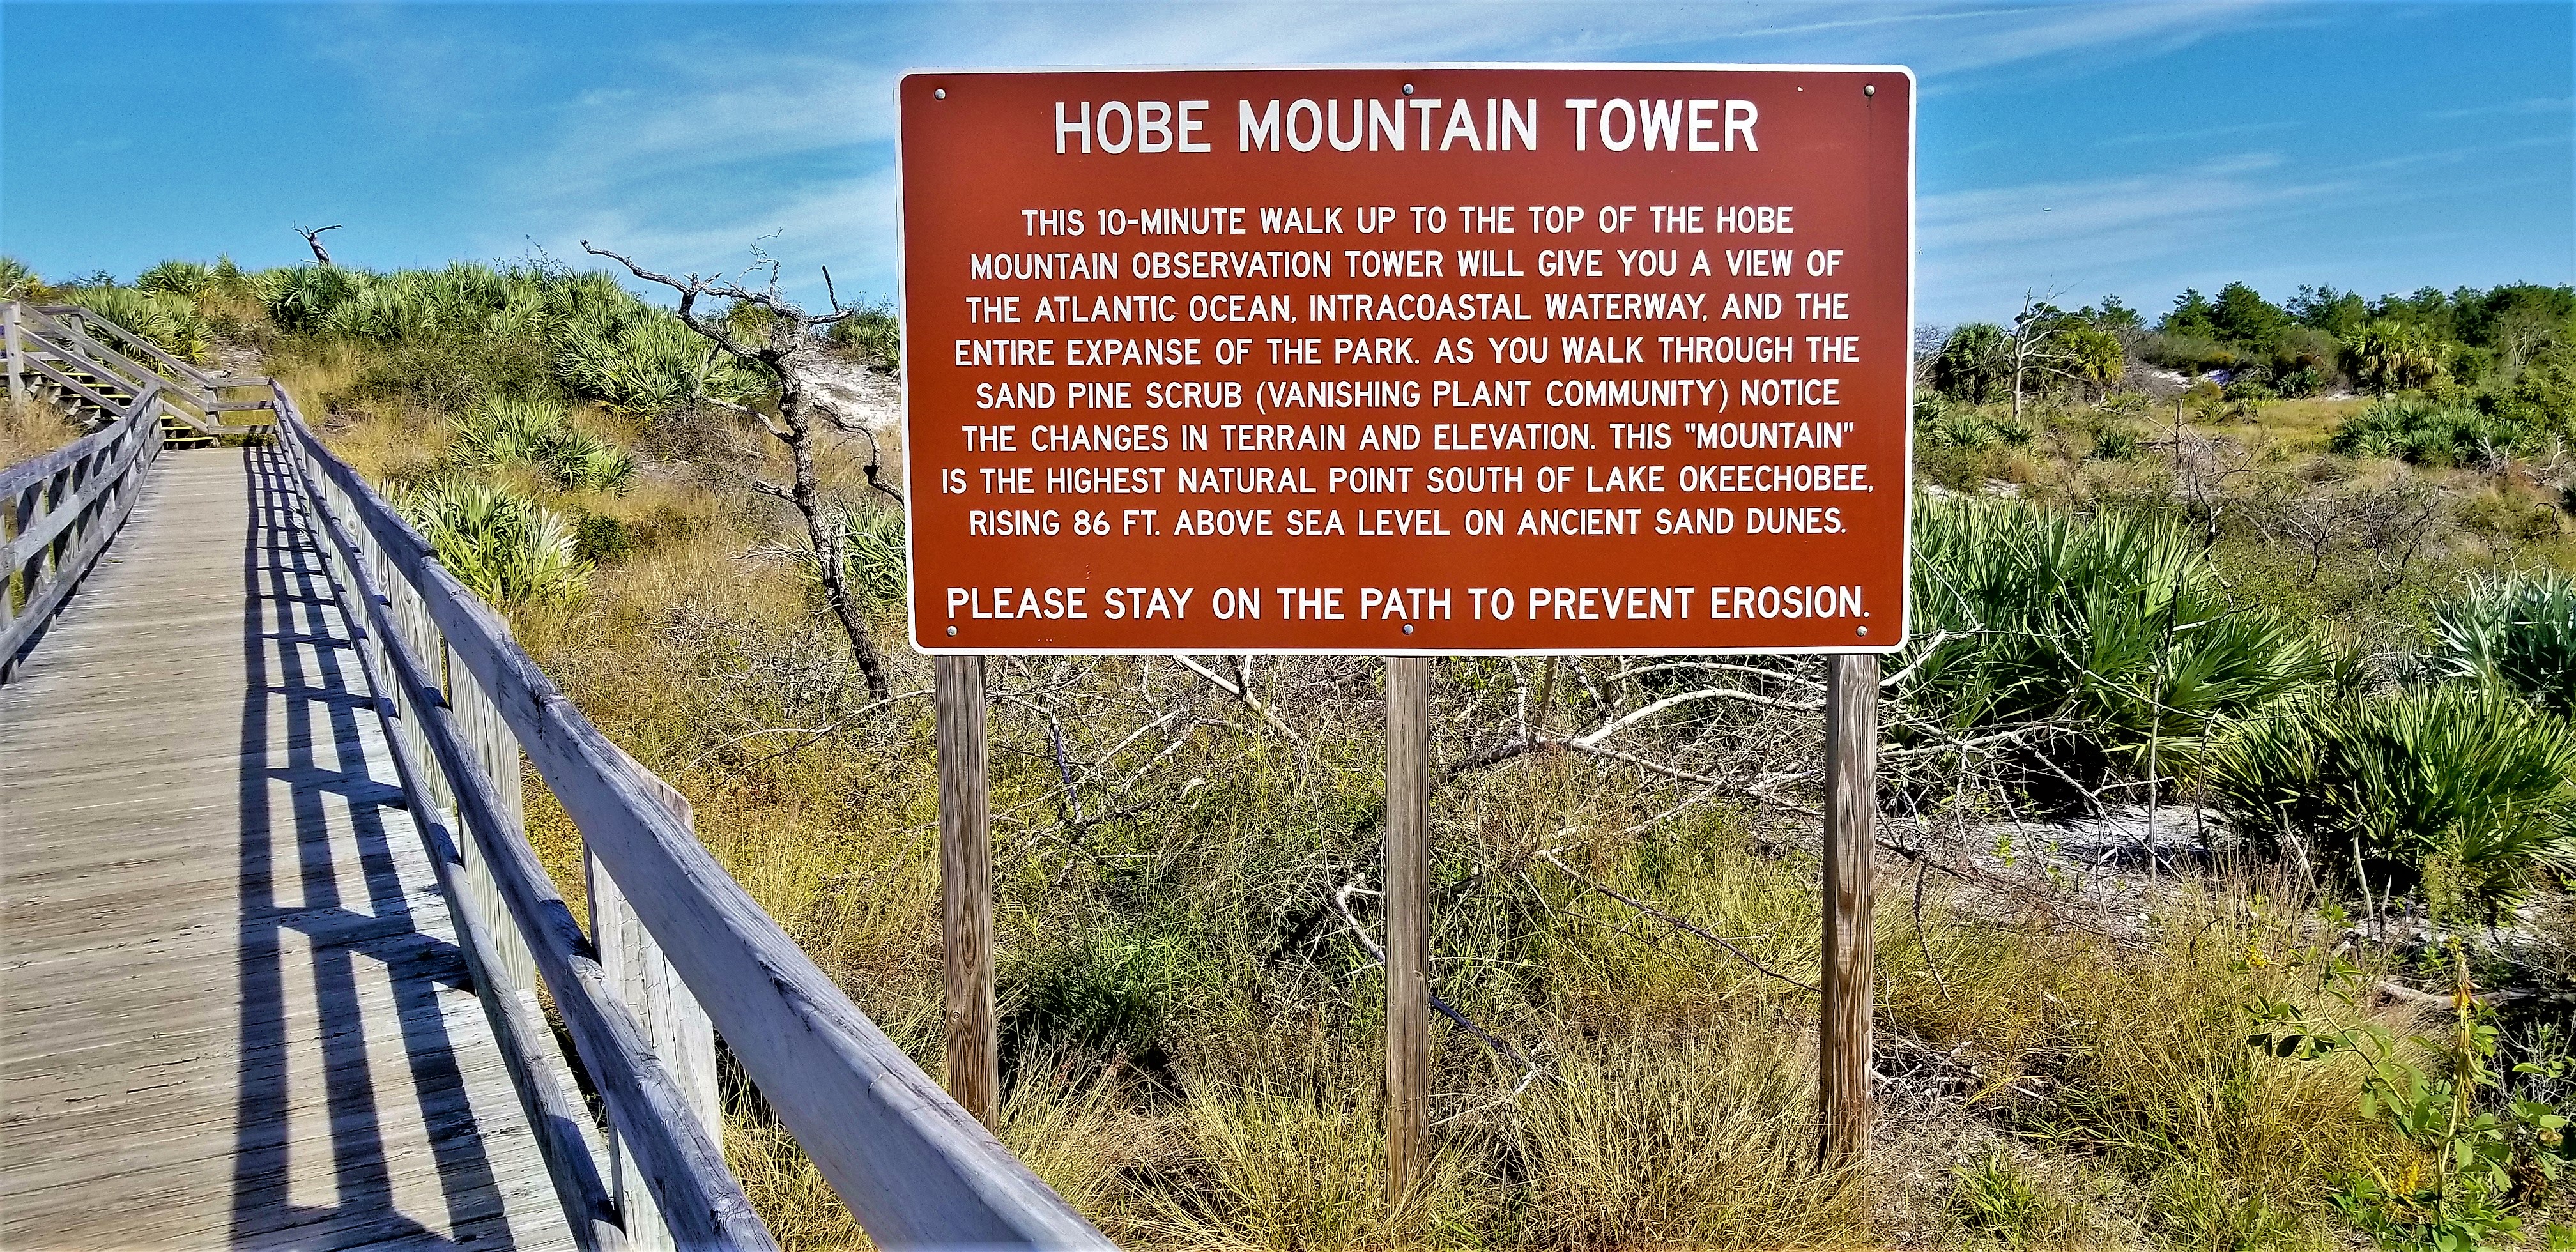 Hobe Mountain Tower sign